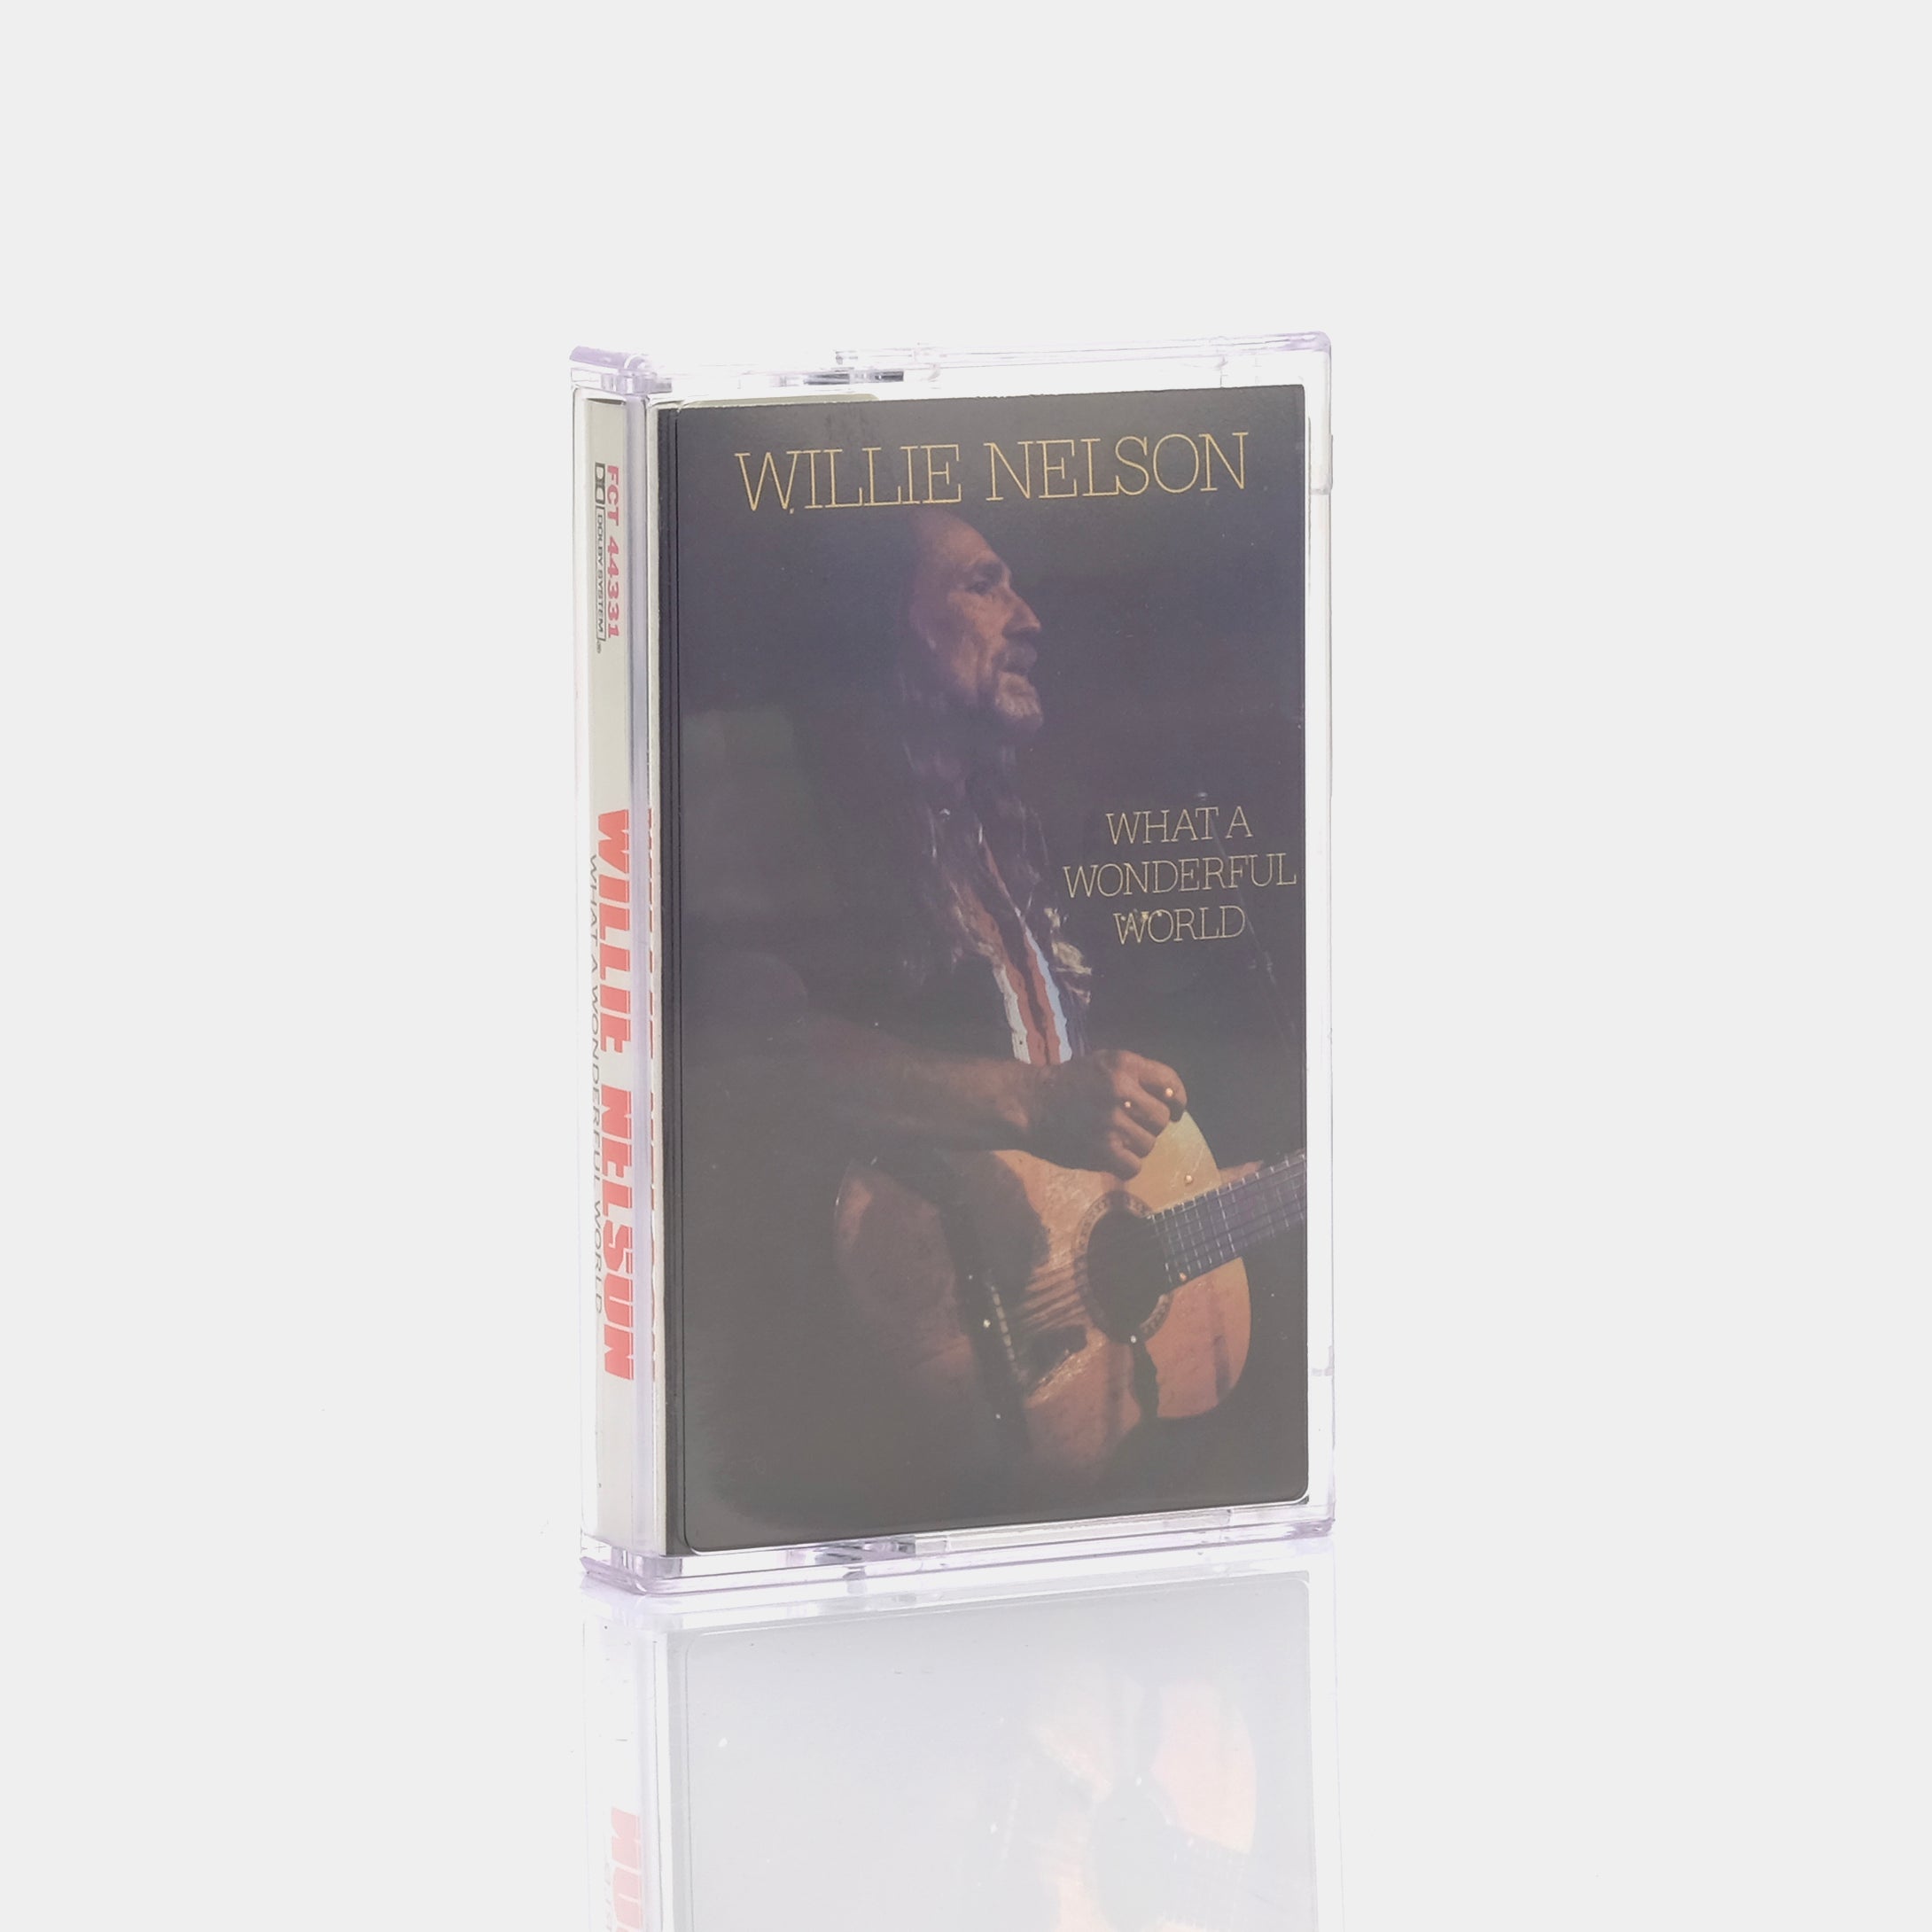 Willie Nelson - What A Wonderful World Cassette Tape